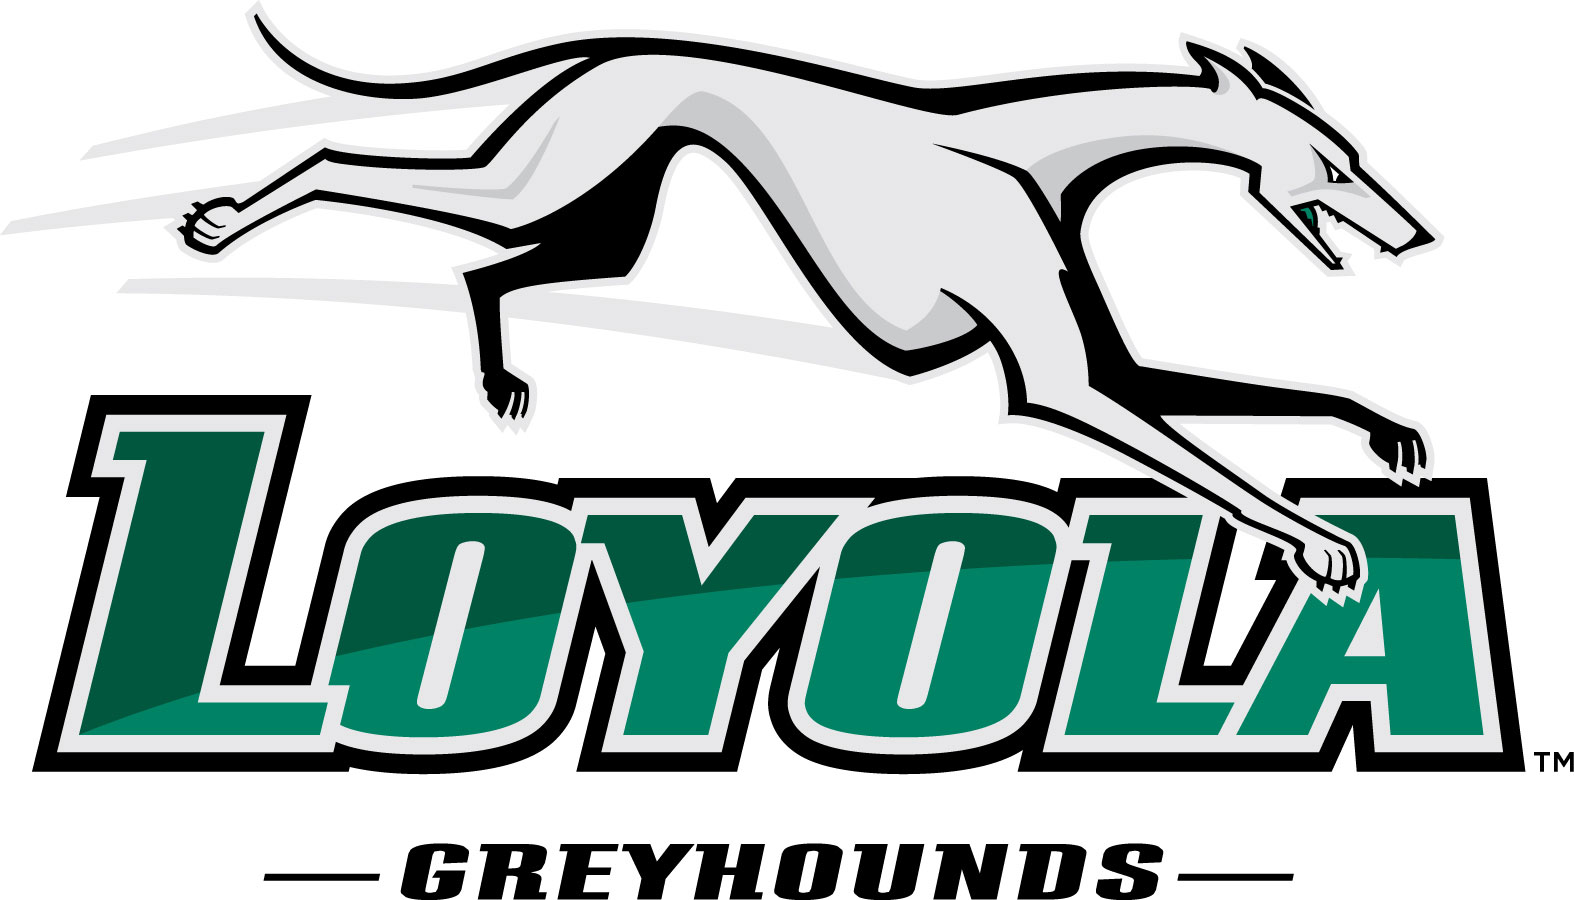 this is the logo of the University of Loyola Maryland